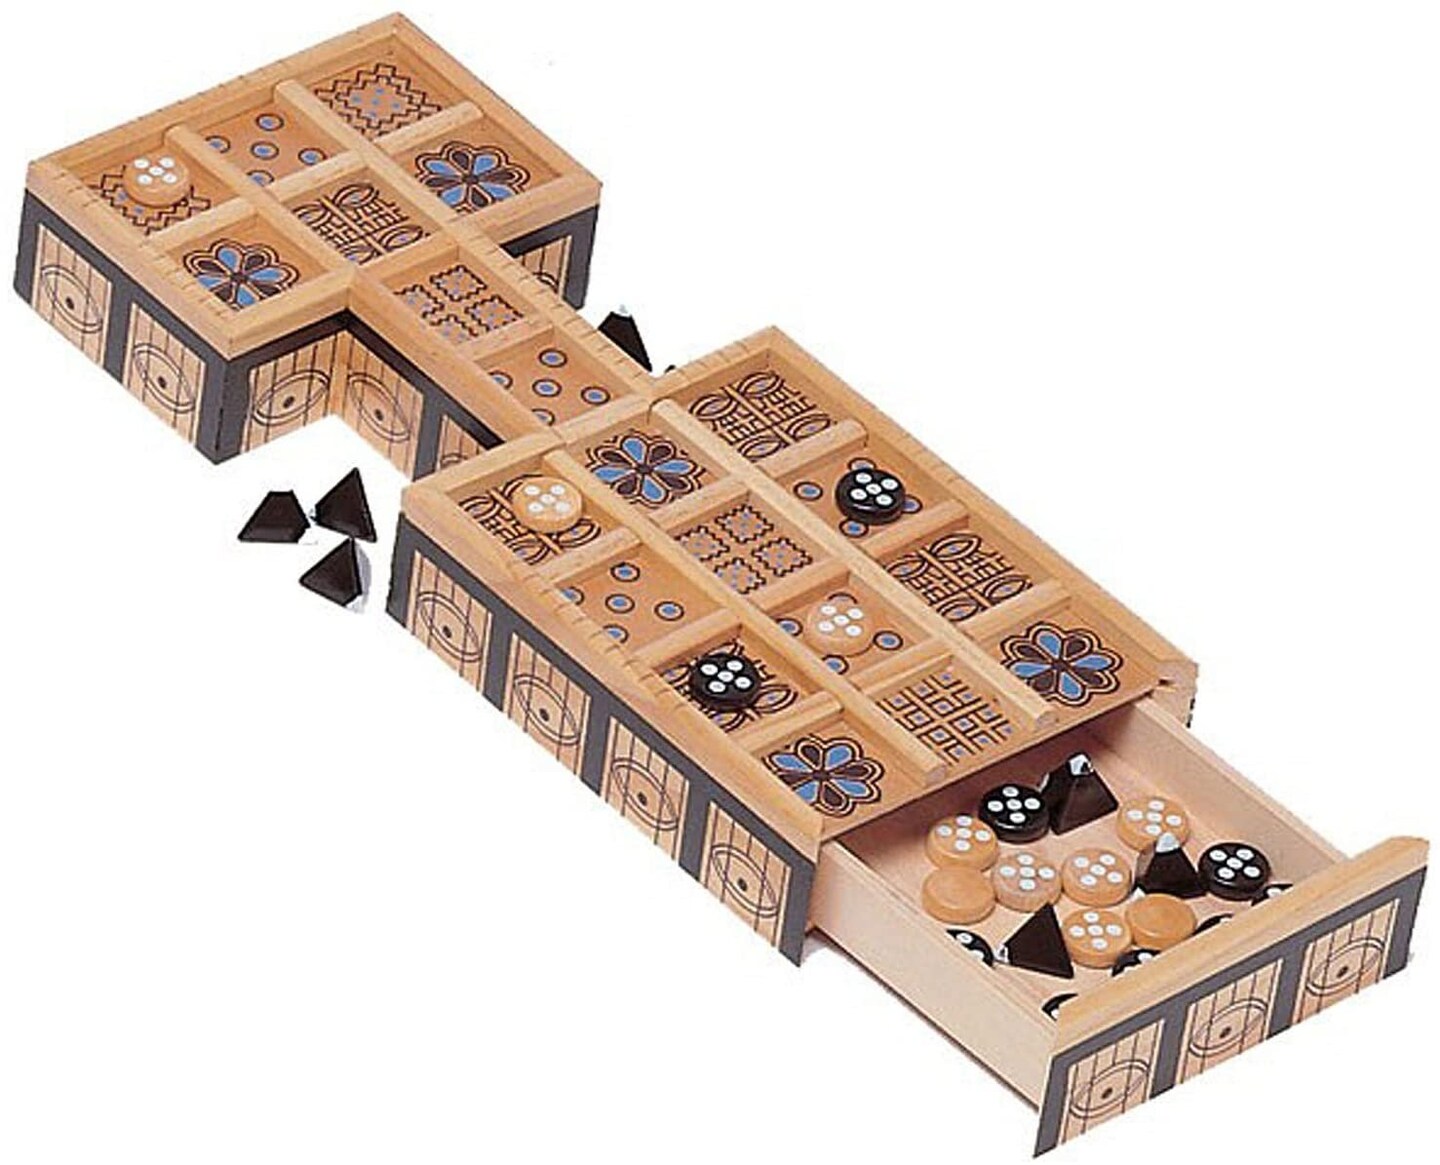 WE Games Replacement Wooden Game Pieces from The Game of UR - Extra Set of Pieces